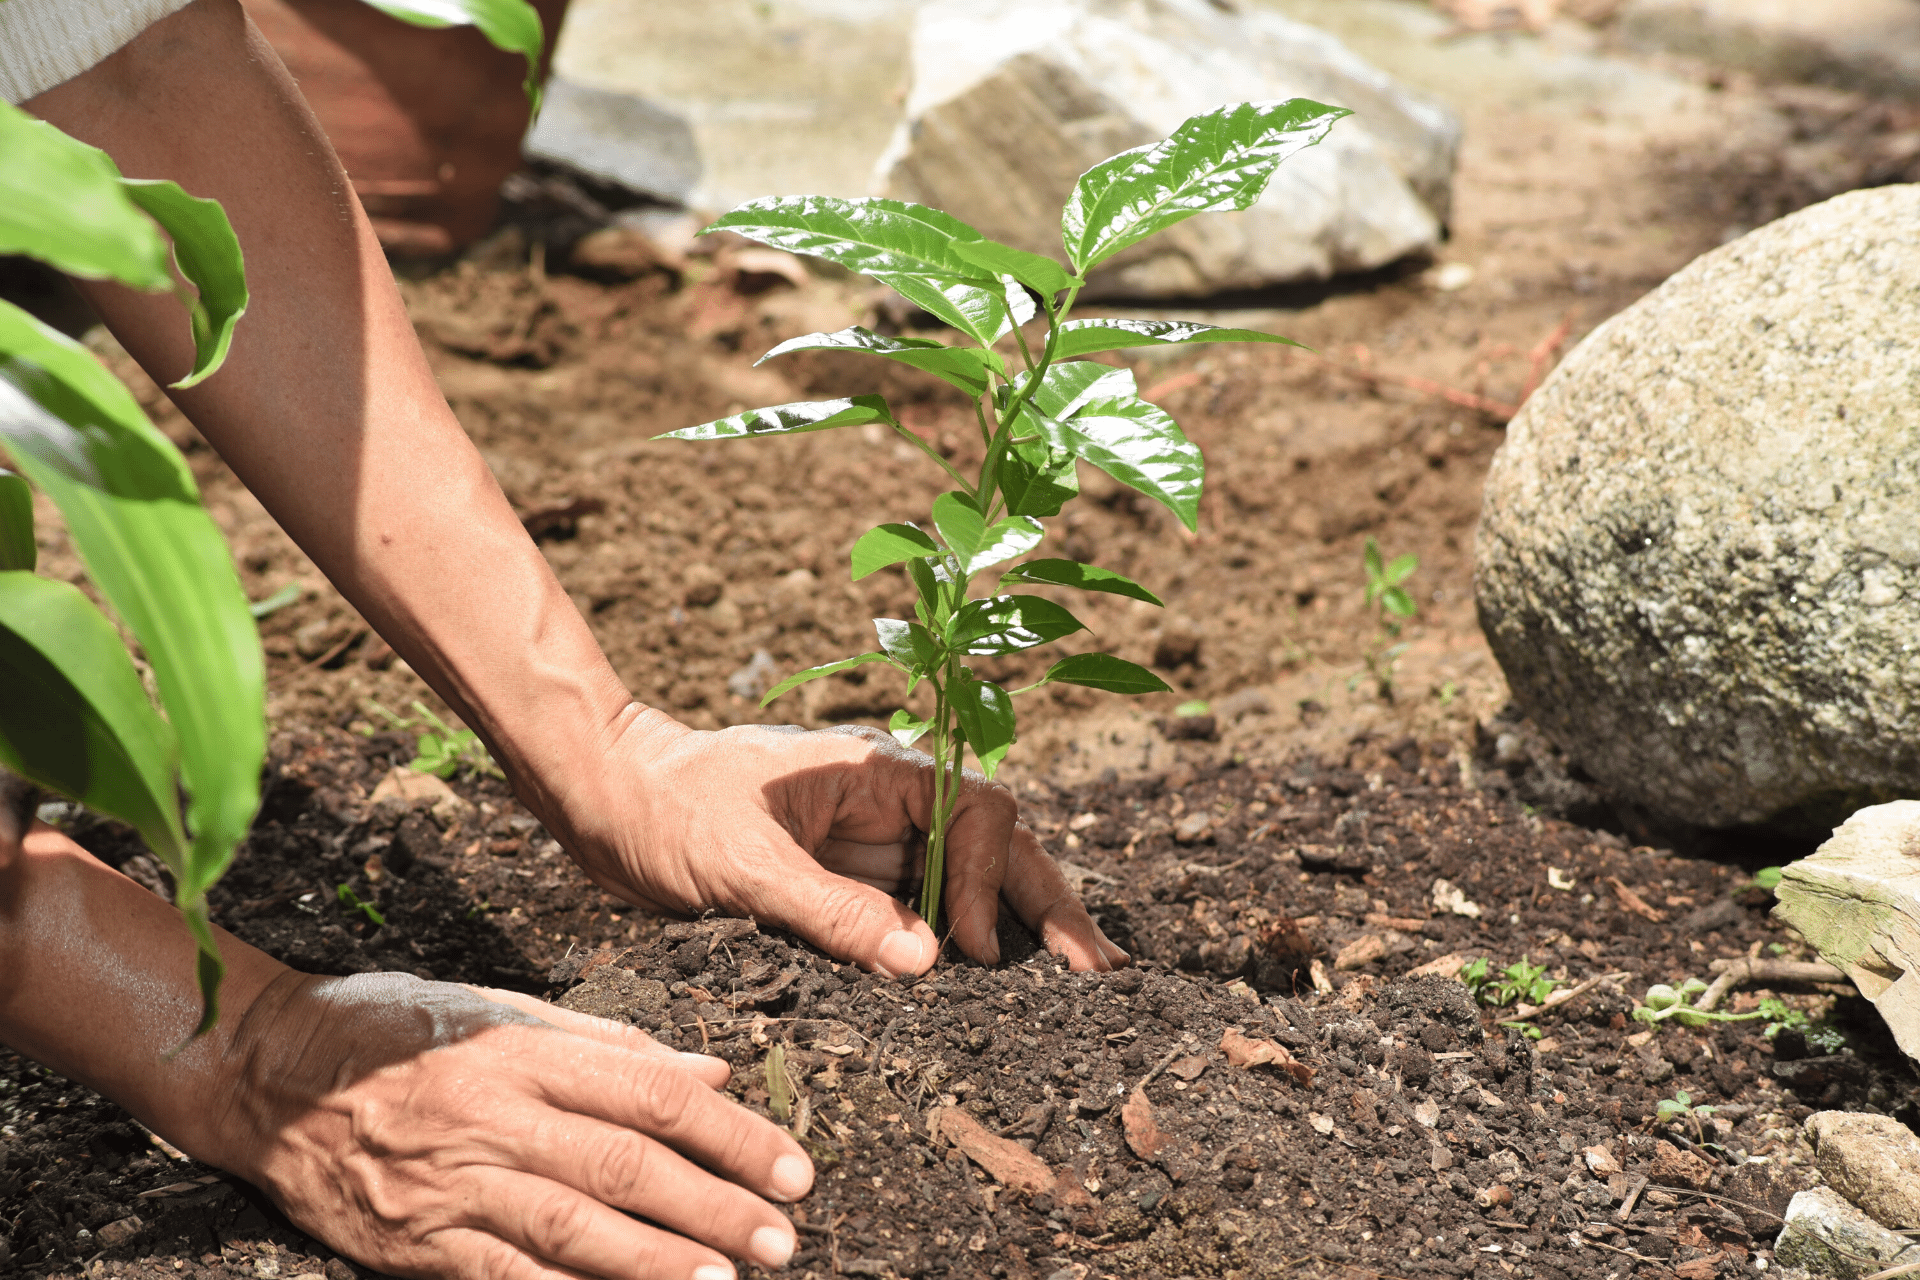 Planting Trees to Mitigate Climate Change